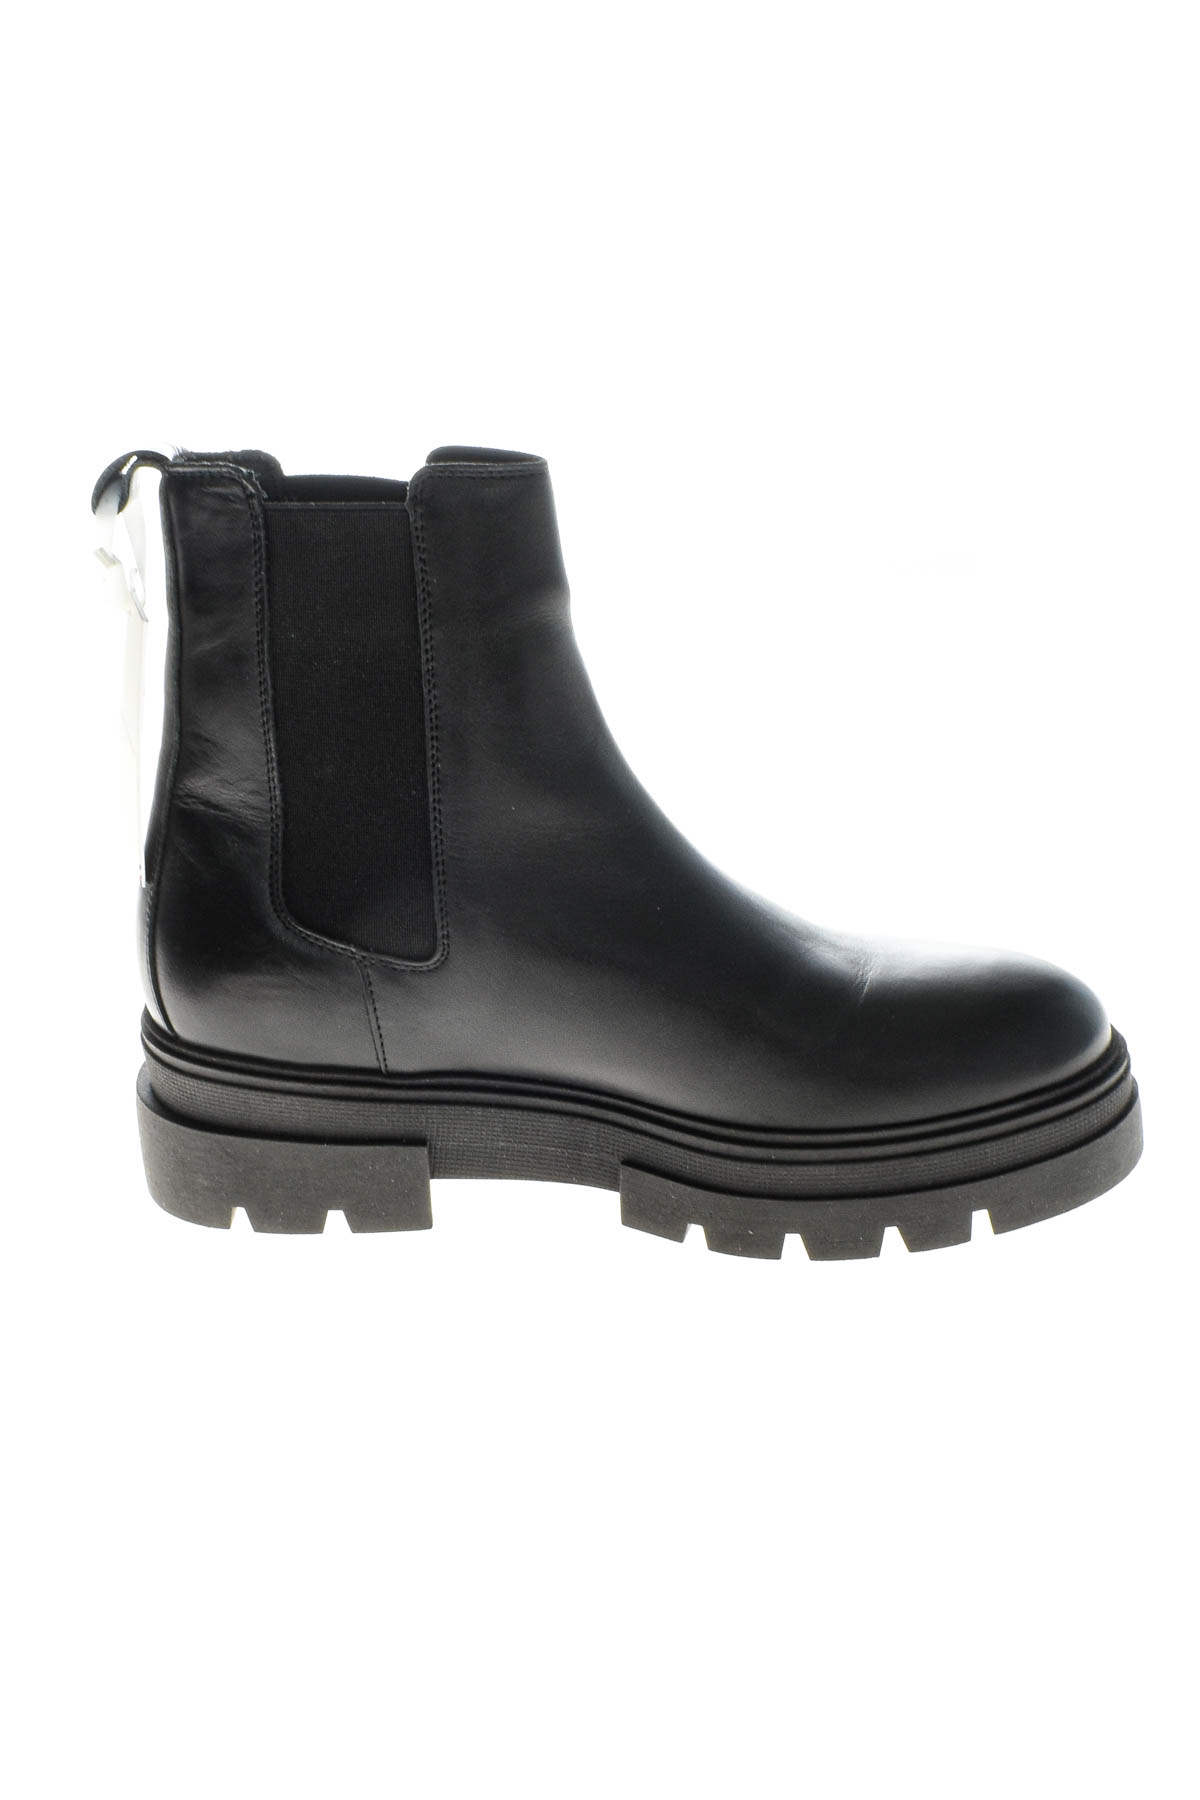 Women's boots - TOMMY HILFIGER - 2